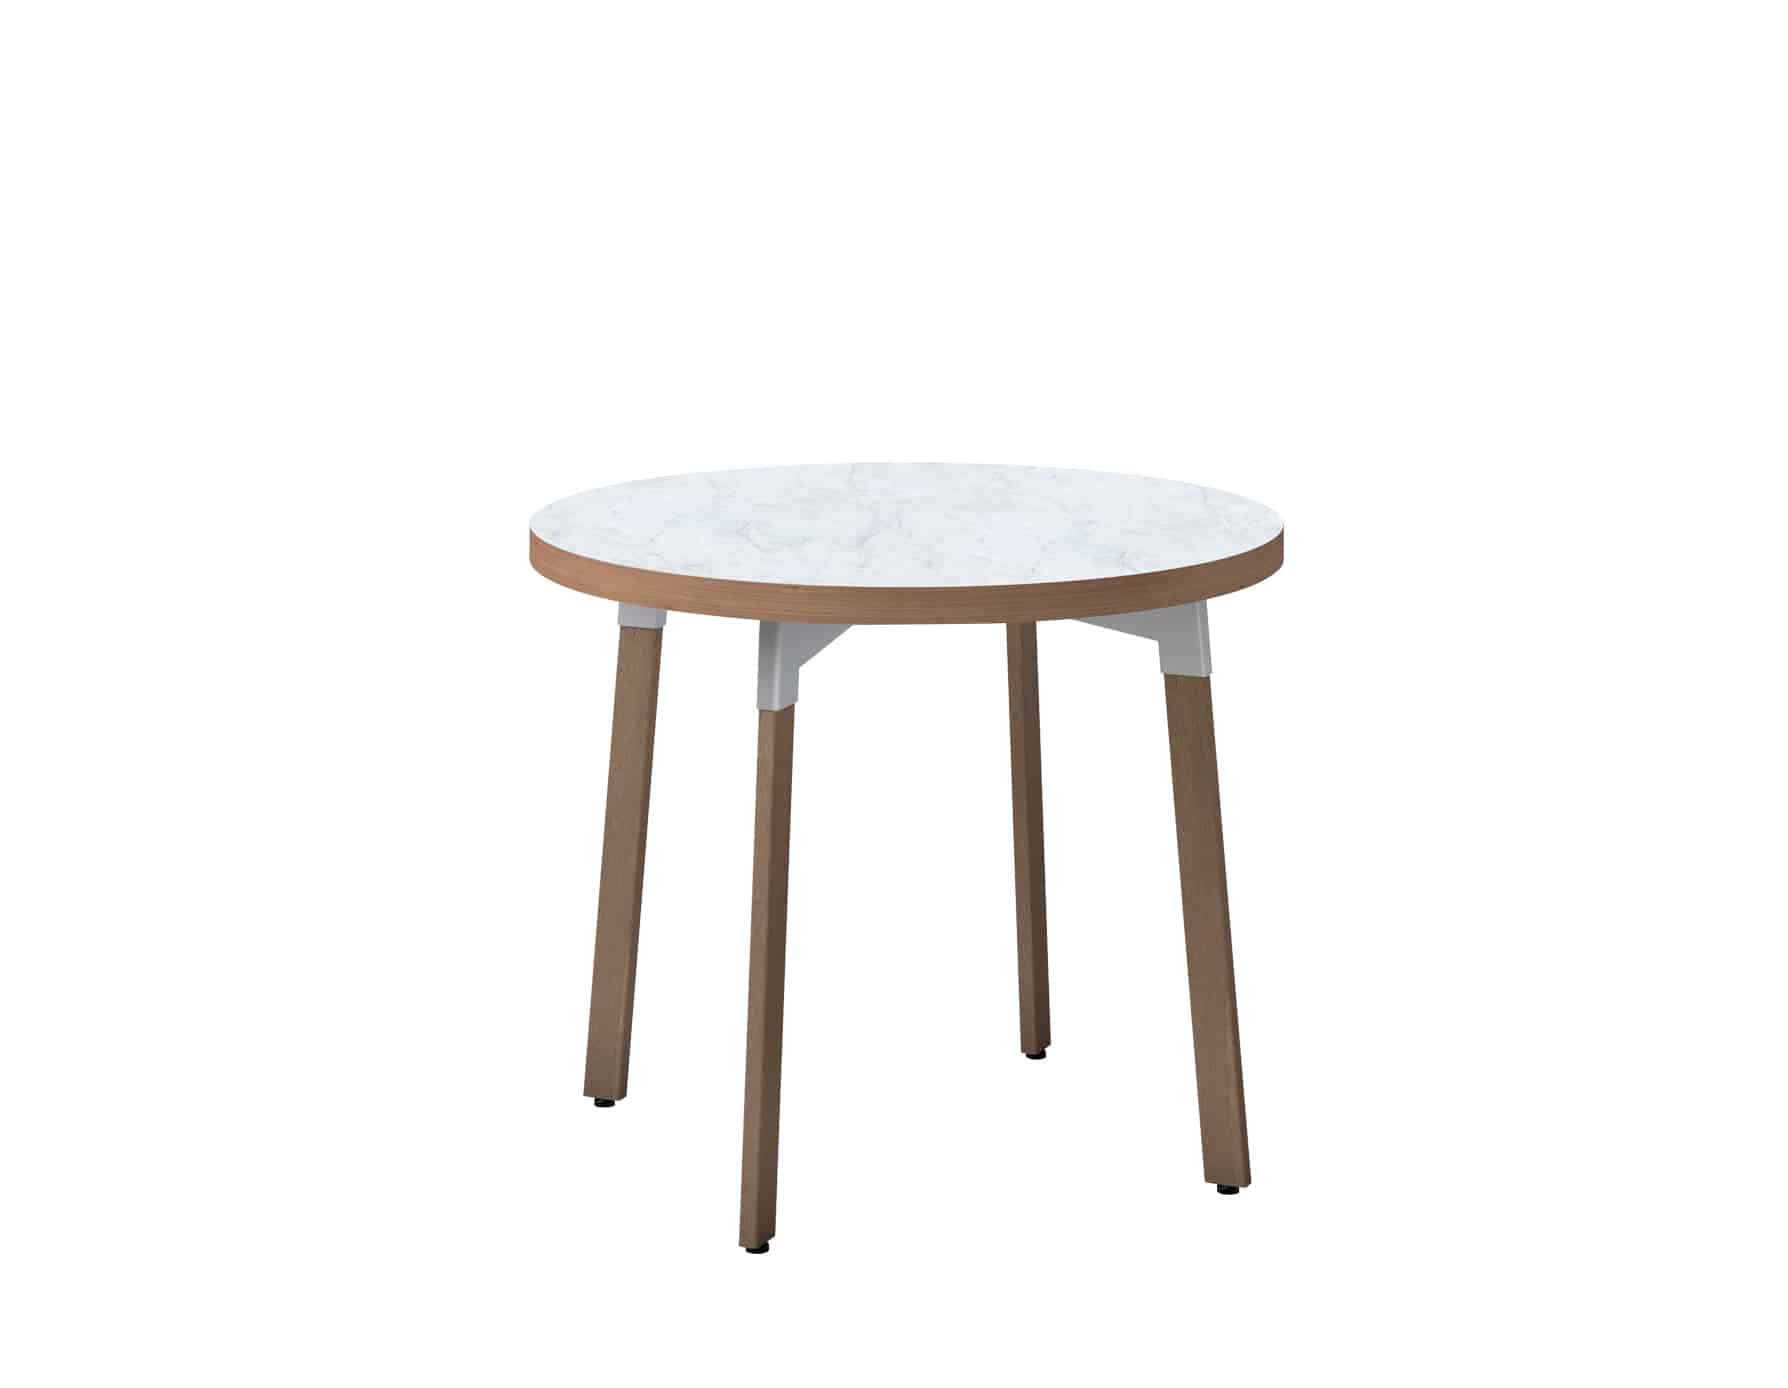 Round Occasional Table with Wood Legs, Metal Brackets, and Laminate Top